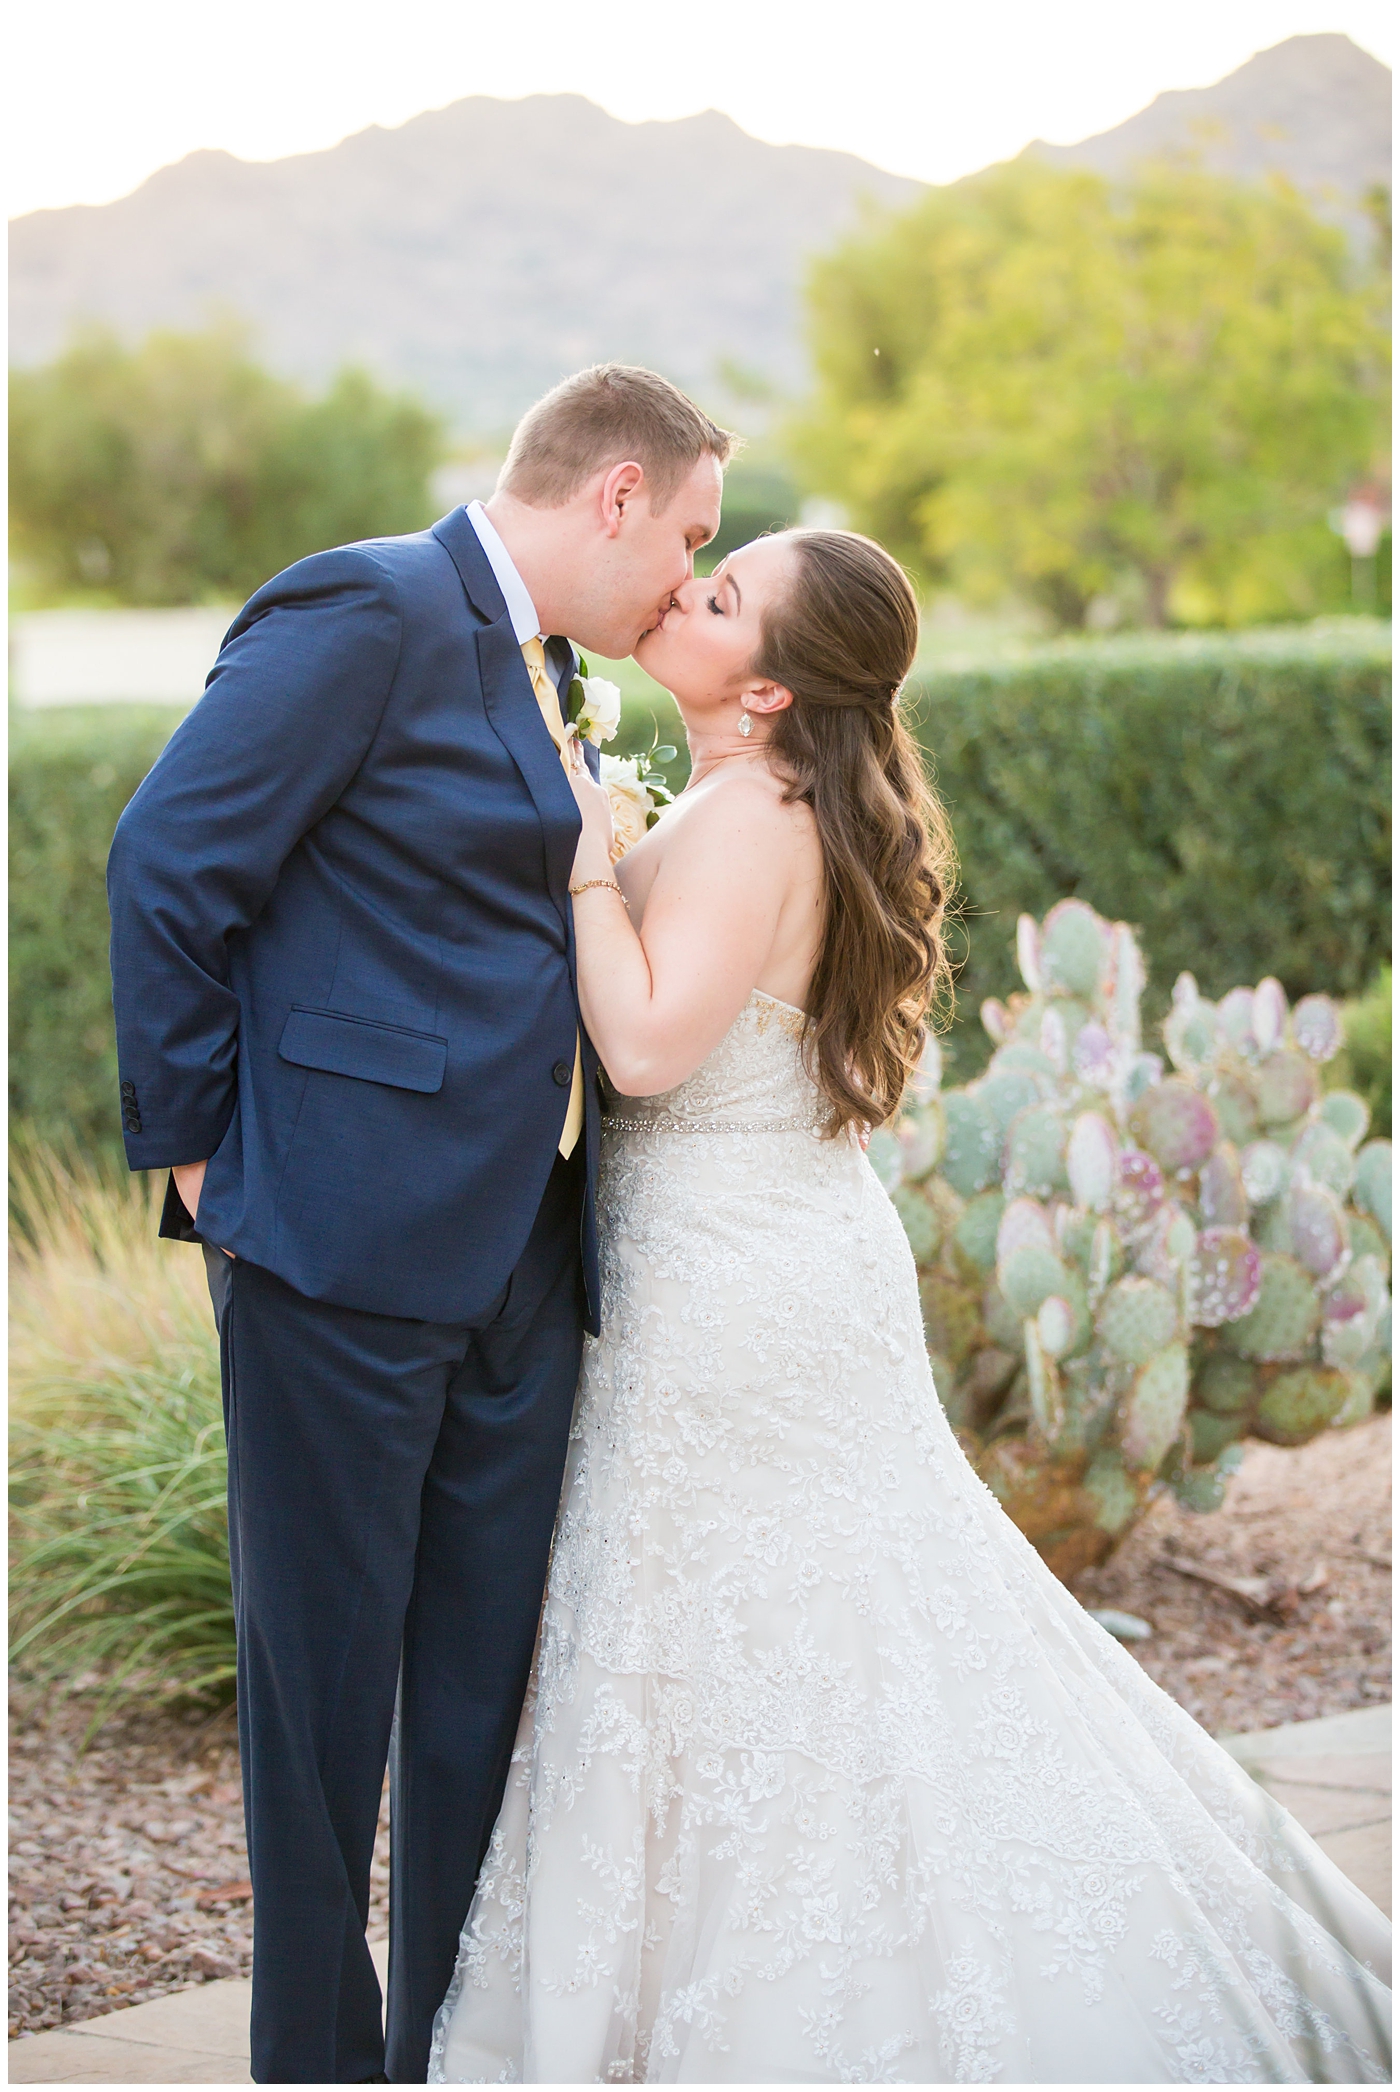 bride in lillian lottie couture wedding dress with white rose bouquet and groom in navy blue suit from men's warehouse bride and groom wedding portrait